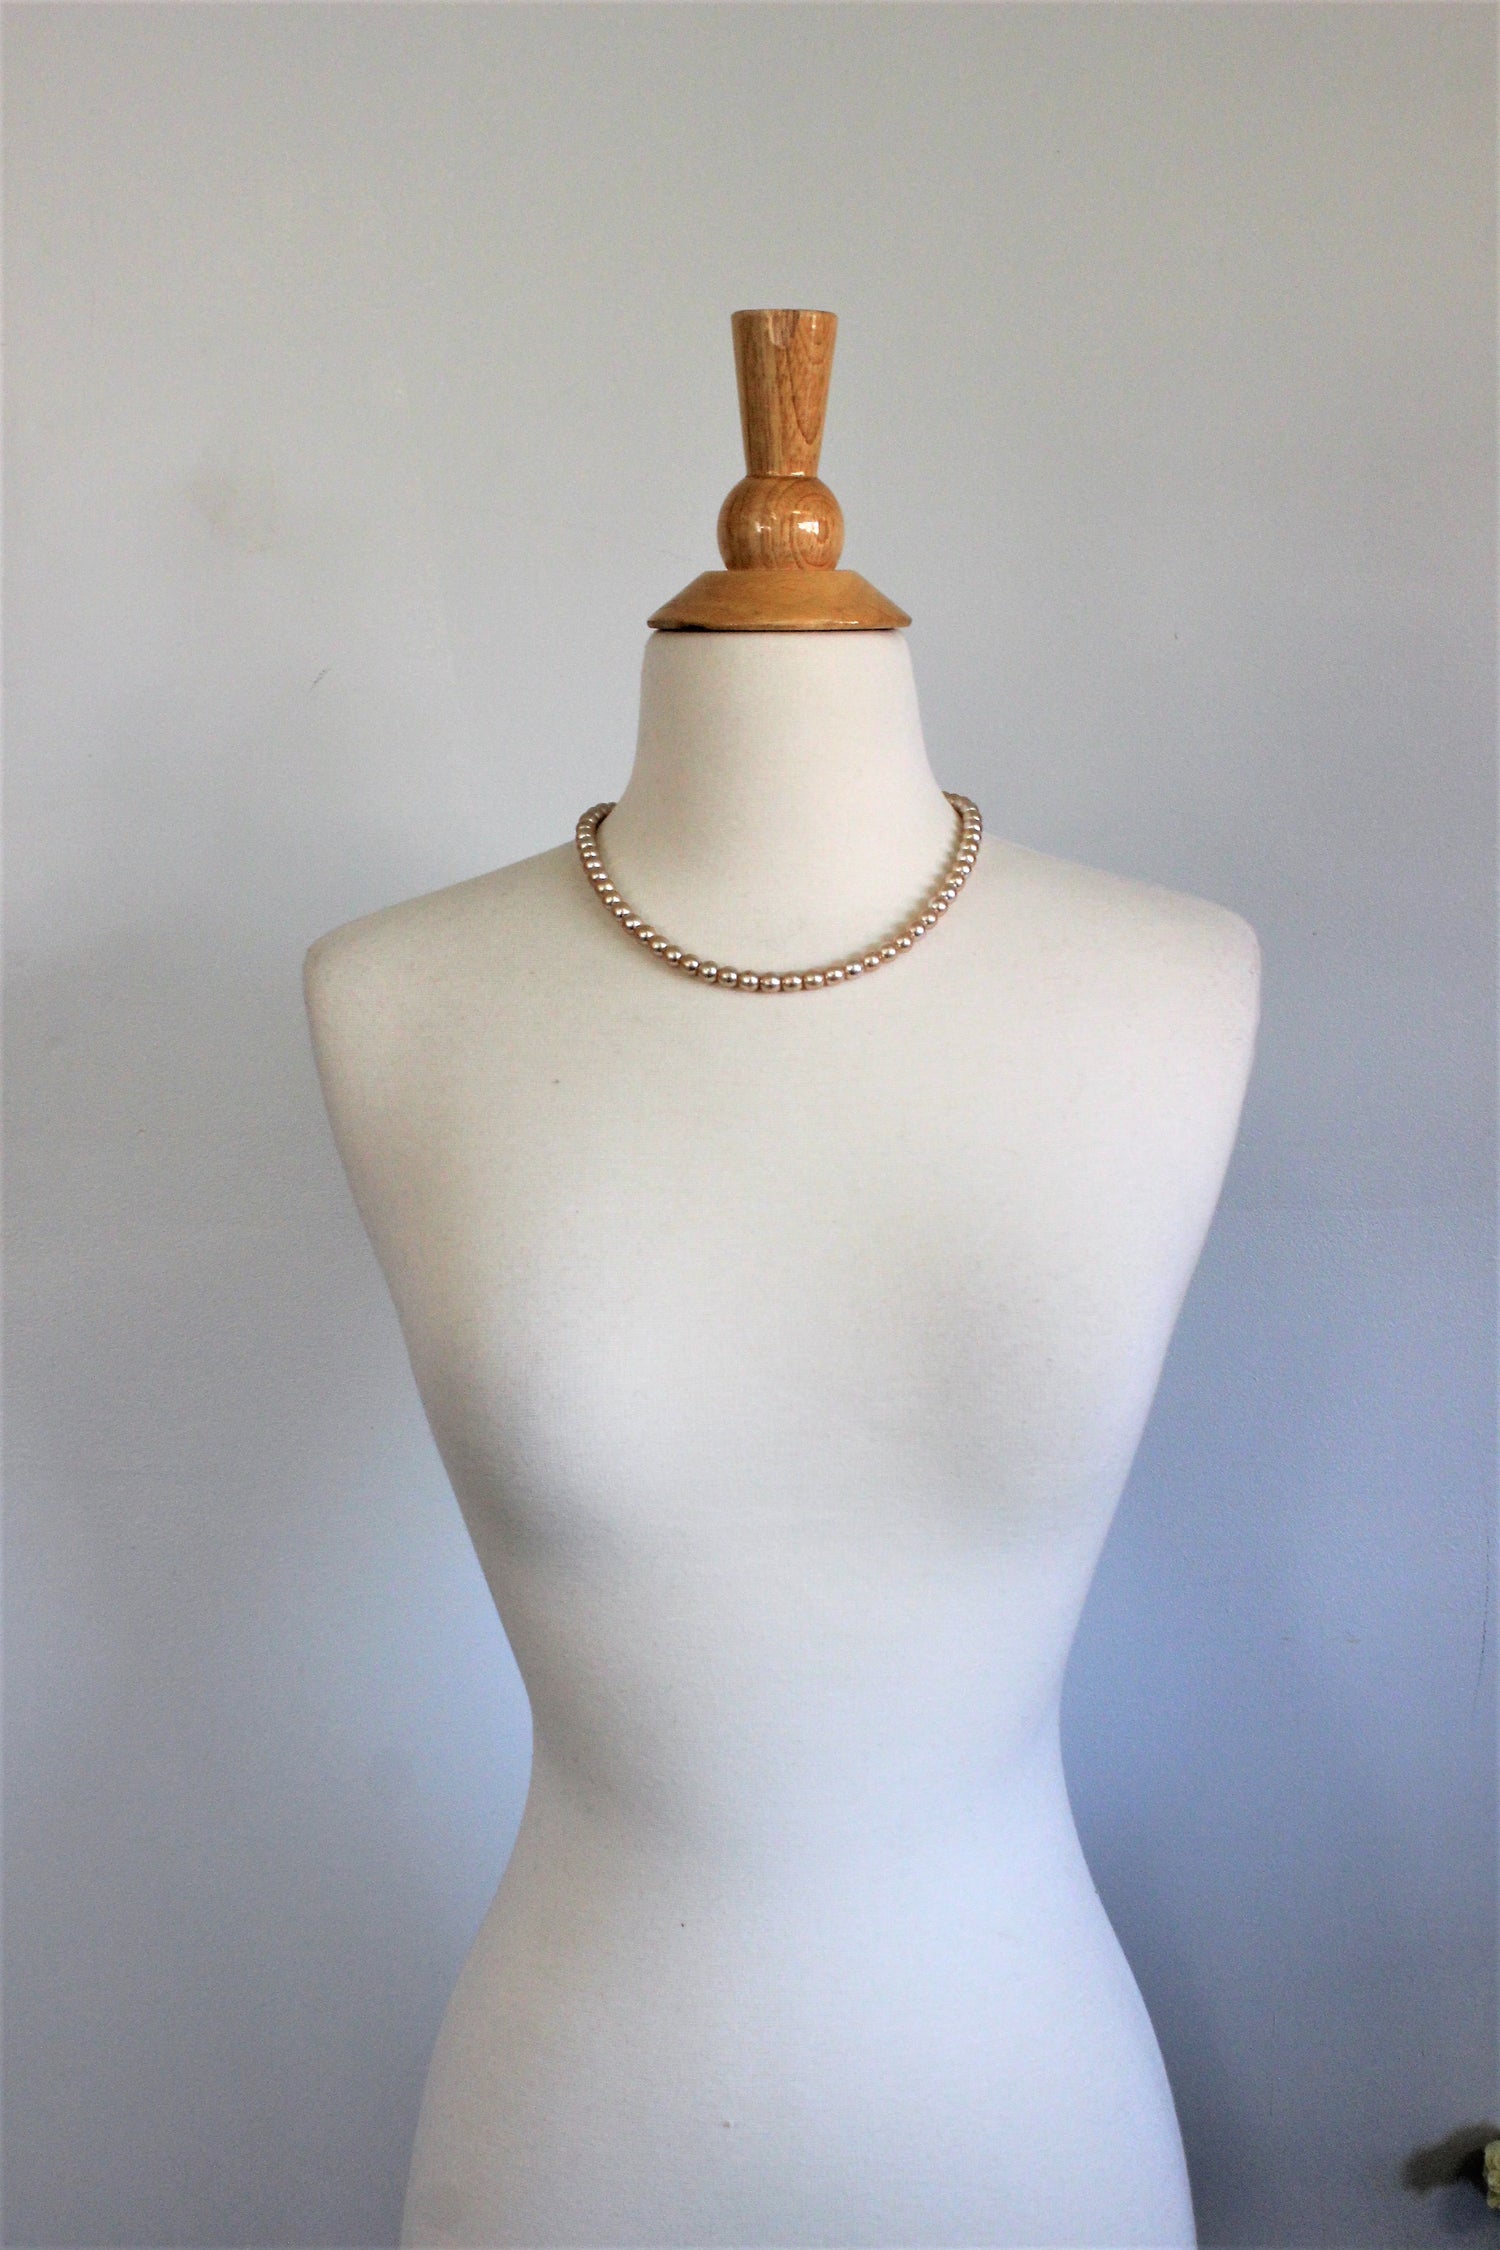 Vintage 1960s Faux Pearl Choker Necklace 18 Inch – Toadstool Farm Vintage